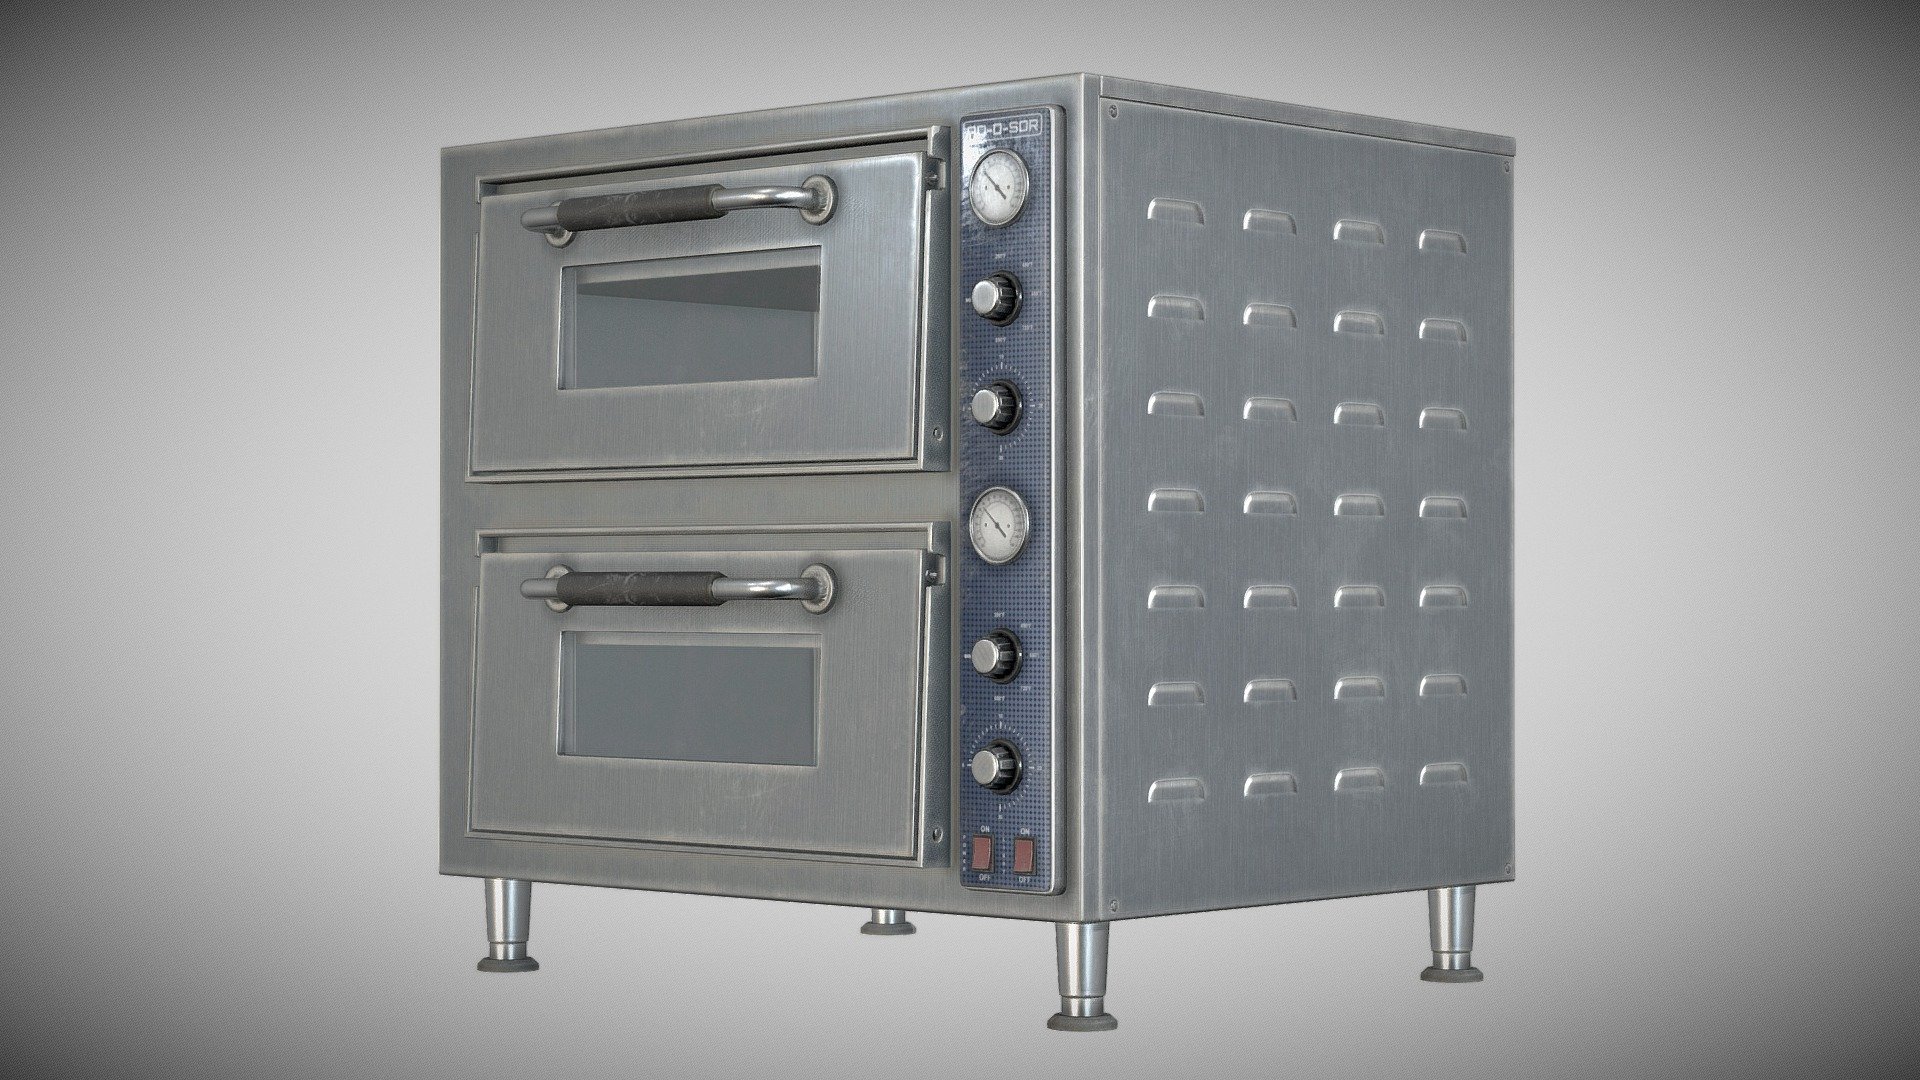 High Quality - fully textured PBR game ready model of a commercial restaurant pizza oven.

Immerse your audience in an authentic culinary experience with this highly accurate and meticulously modeled commercial oven. From its sleek stainless steel exterior to its intuitive control panel, every element has been painstakingly crafted to replicate the real-world counterpart with utmost precision.

Created with optimized geometry and high-resolution textures, this 3D model ensures optimal performance while maintaining exceptional visual fidelity. The meticulously hand-painted textures showcase realistic materials, including metallic surfaces, reflective glass, and durable plastics, enhancing the overall level of immersion.

Object:

Made in Maya
Ready to use in any PBR compliable program such as Unreal, Unity etc.
Models centered at origin 0,0,0.
Real world scale (cm).

Textures:

Full PBR set
Base Colour, Normal, Roughness, Ambient Occlusion, Metallic
All at 4K resolution - Industrial Pizza Oven - Buy Royalty Free 3D model by PixelPress 3d model